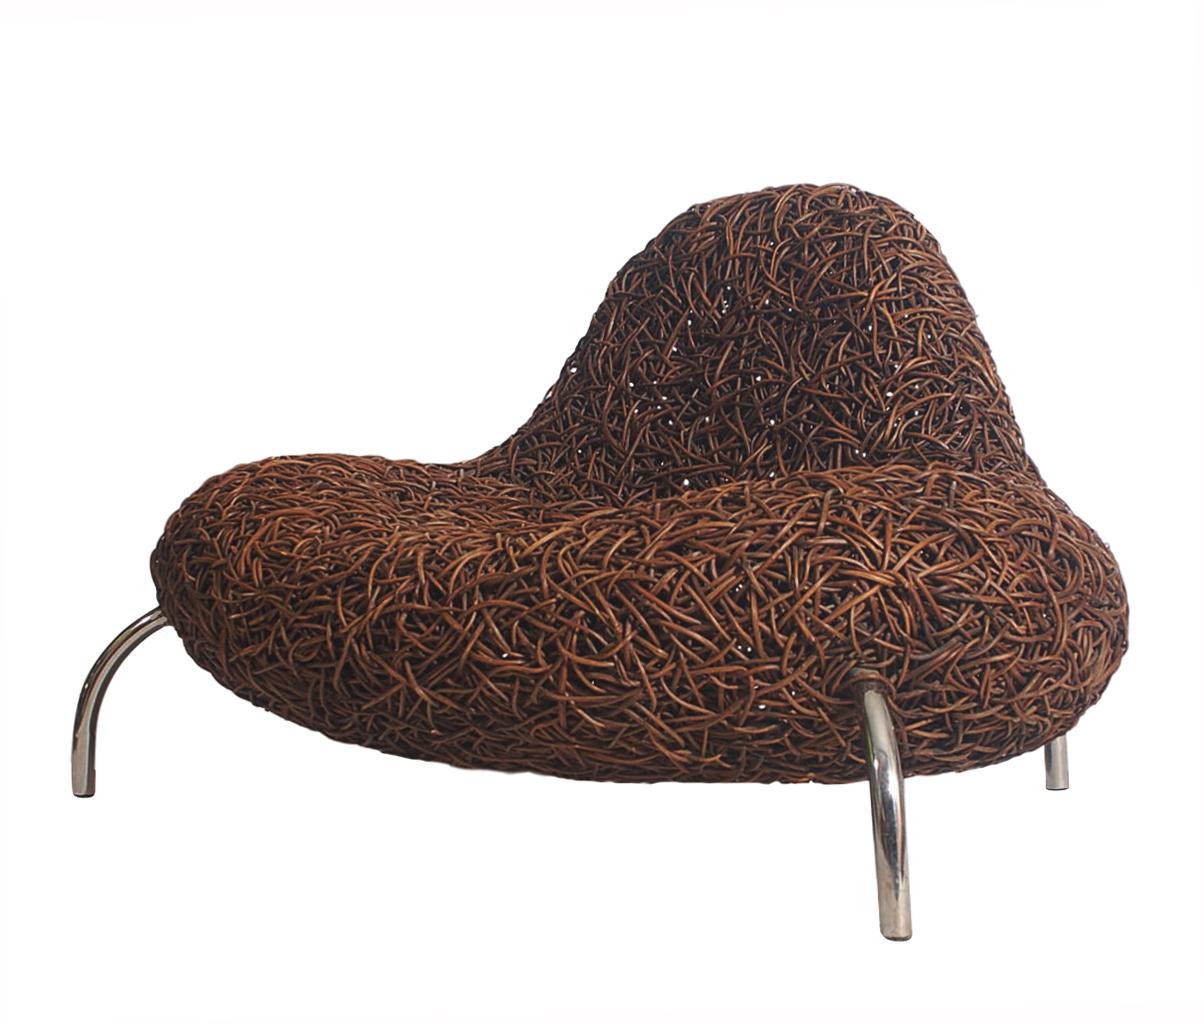 Postmodern Organic Rattan Lounge Chair by Udom Udomsrianan & Planet 2001 In Good Condition For Sale In Philadelphia, PA